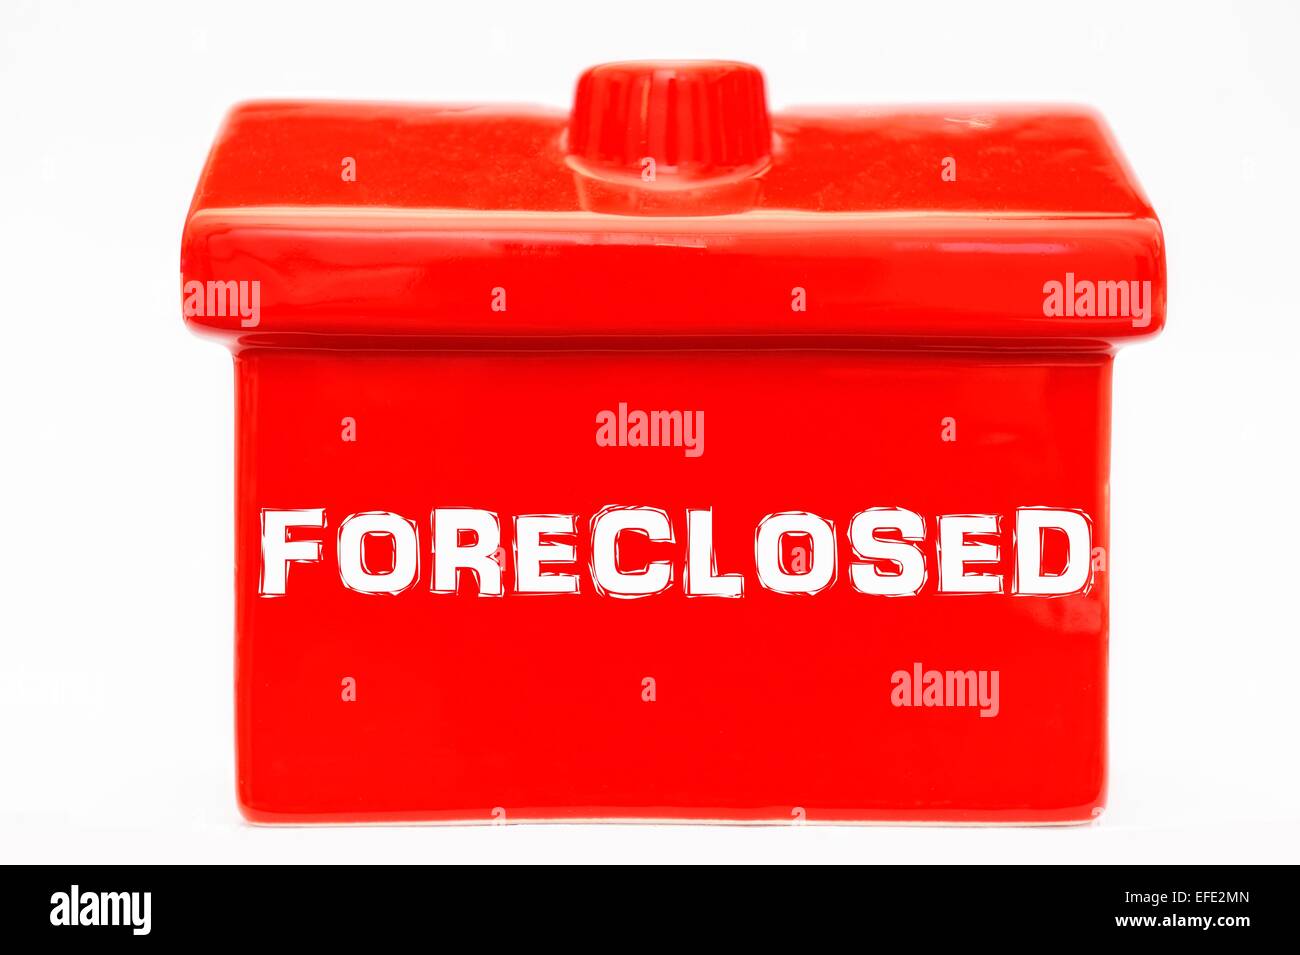 Foreclosed Stock Photo